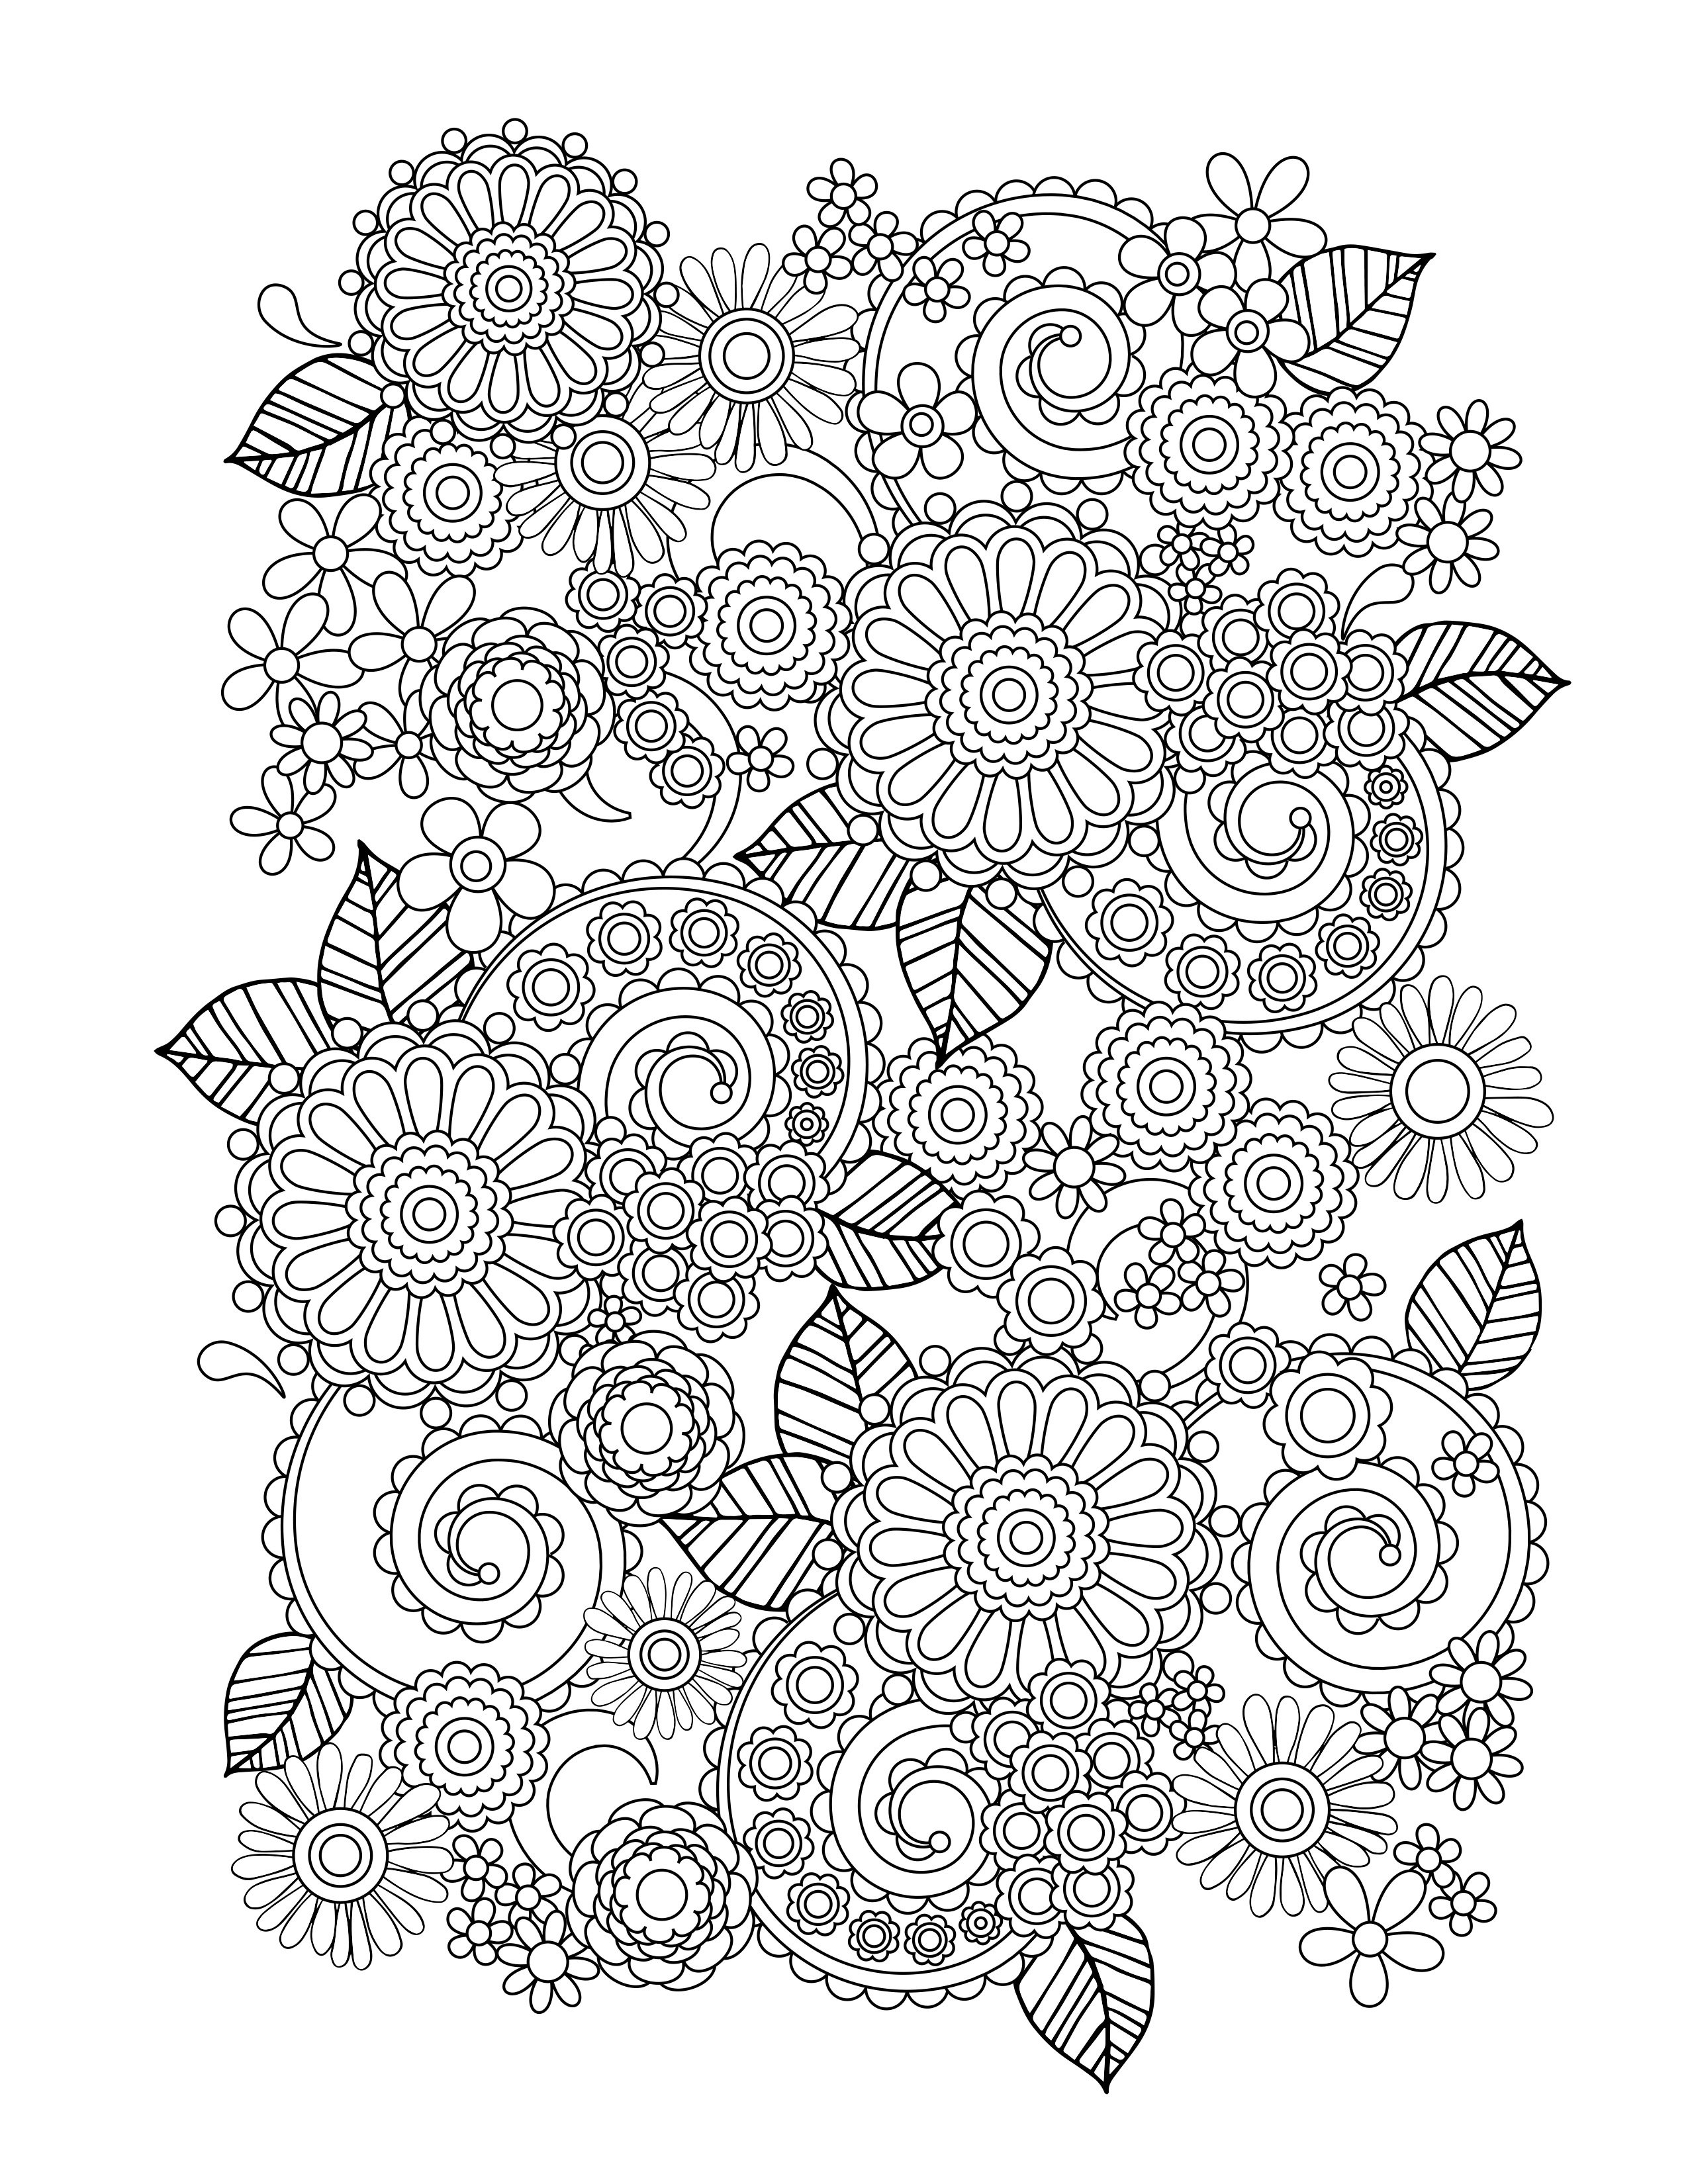 Flower Coloring Pages for Adults   Best Coloring Pages For Kids